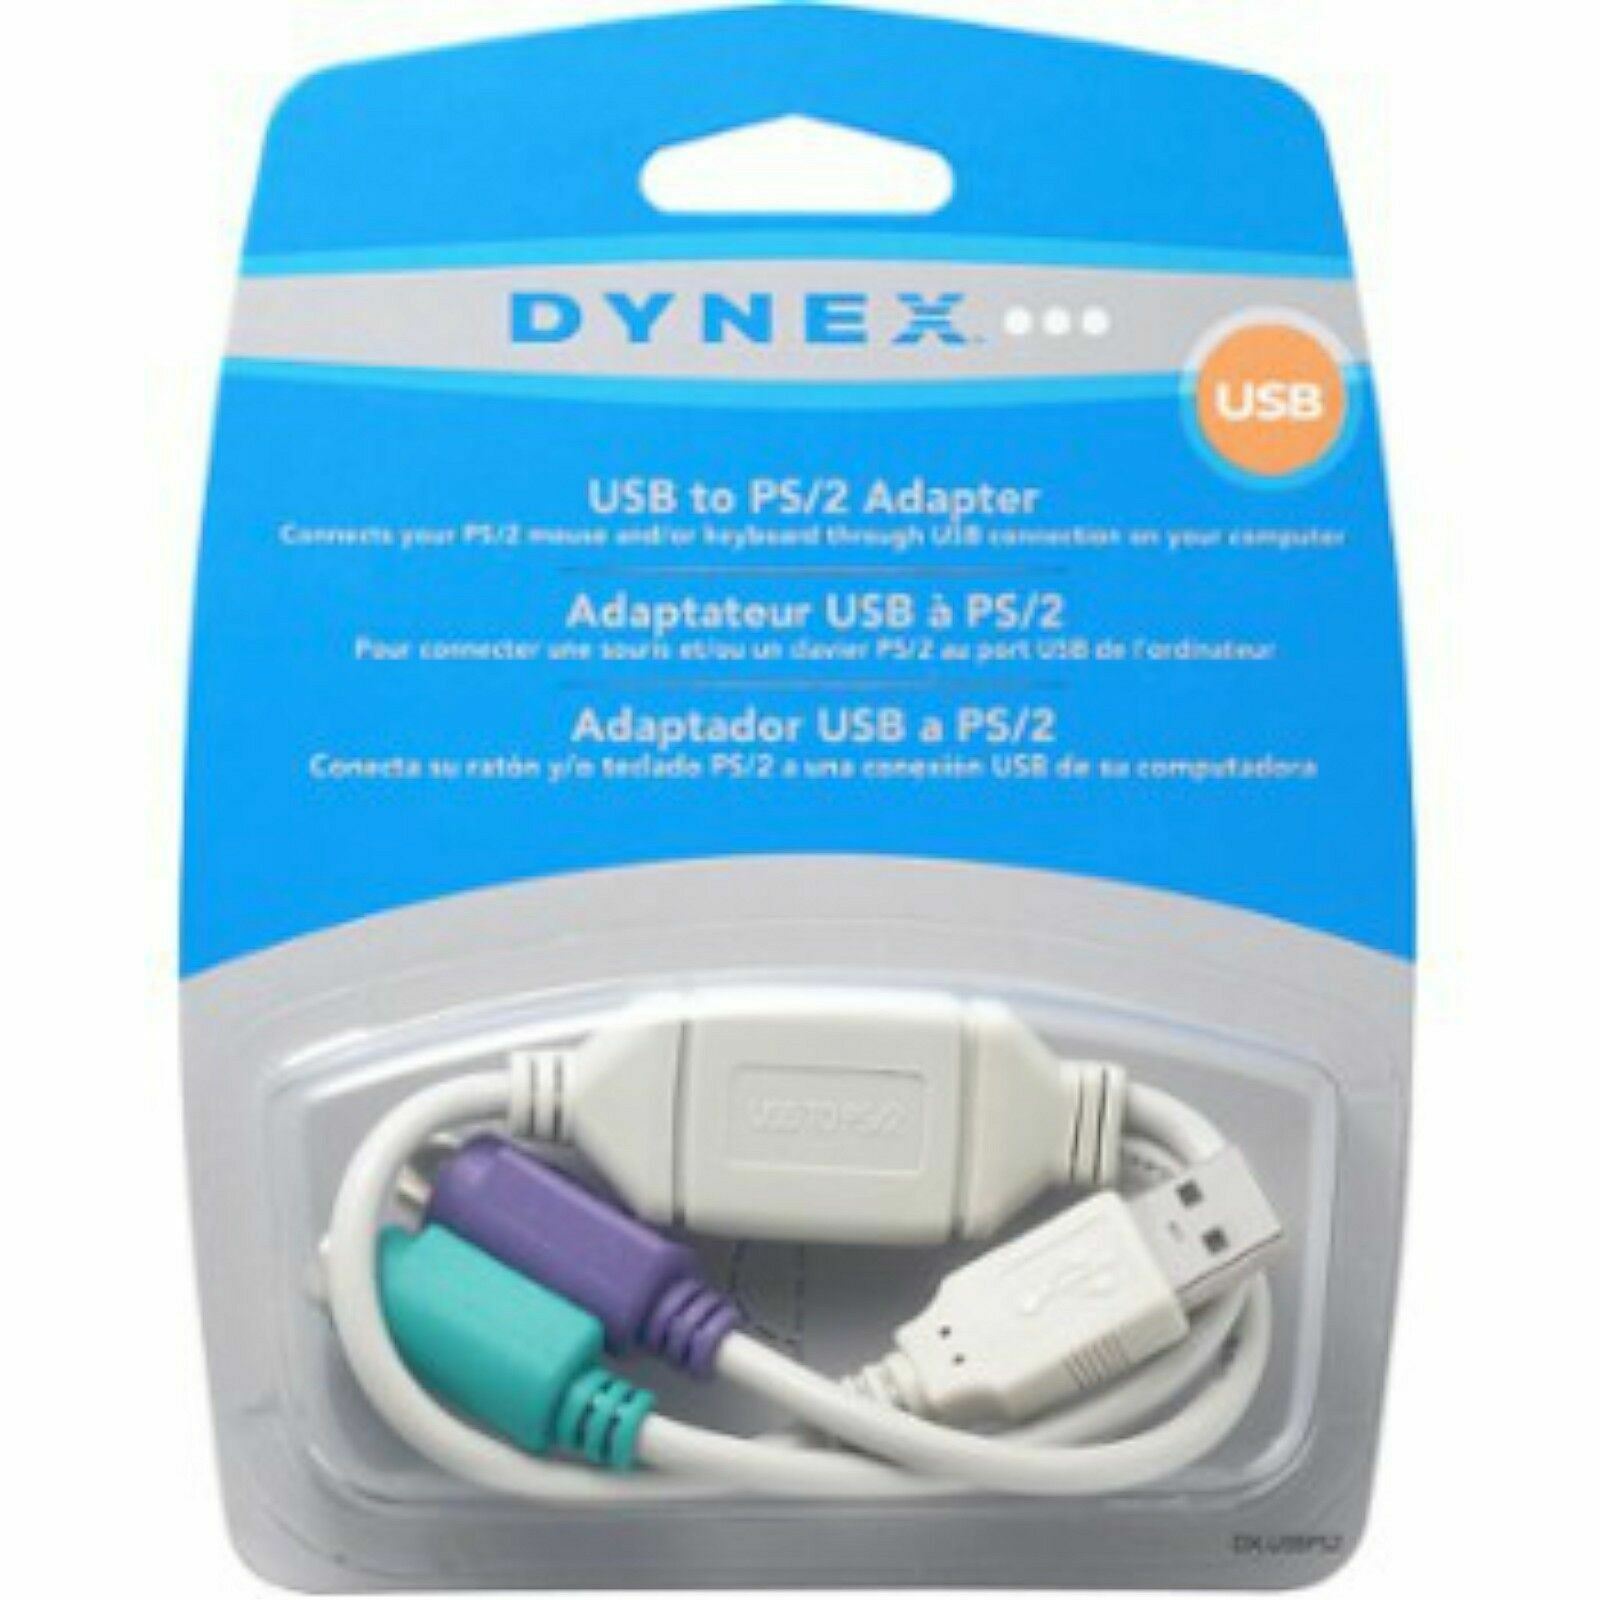 NEW Dynex DX-USBPS2 USB-to-PS/2 KVM Mouse Keyboard Port Adapter Cable Converter